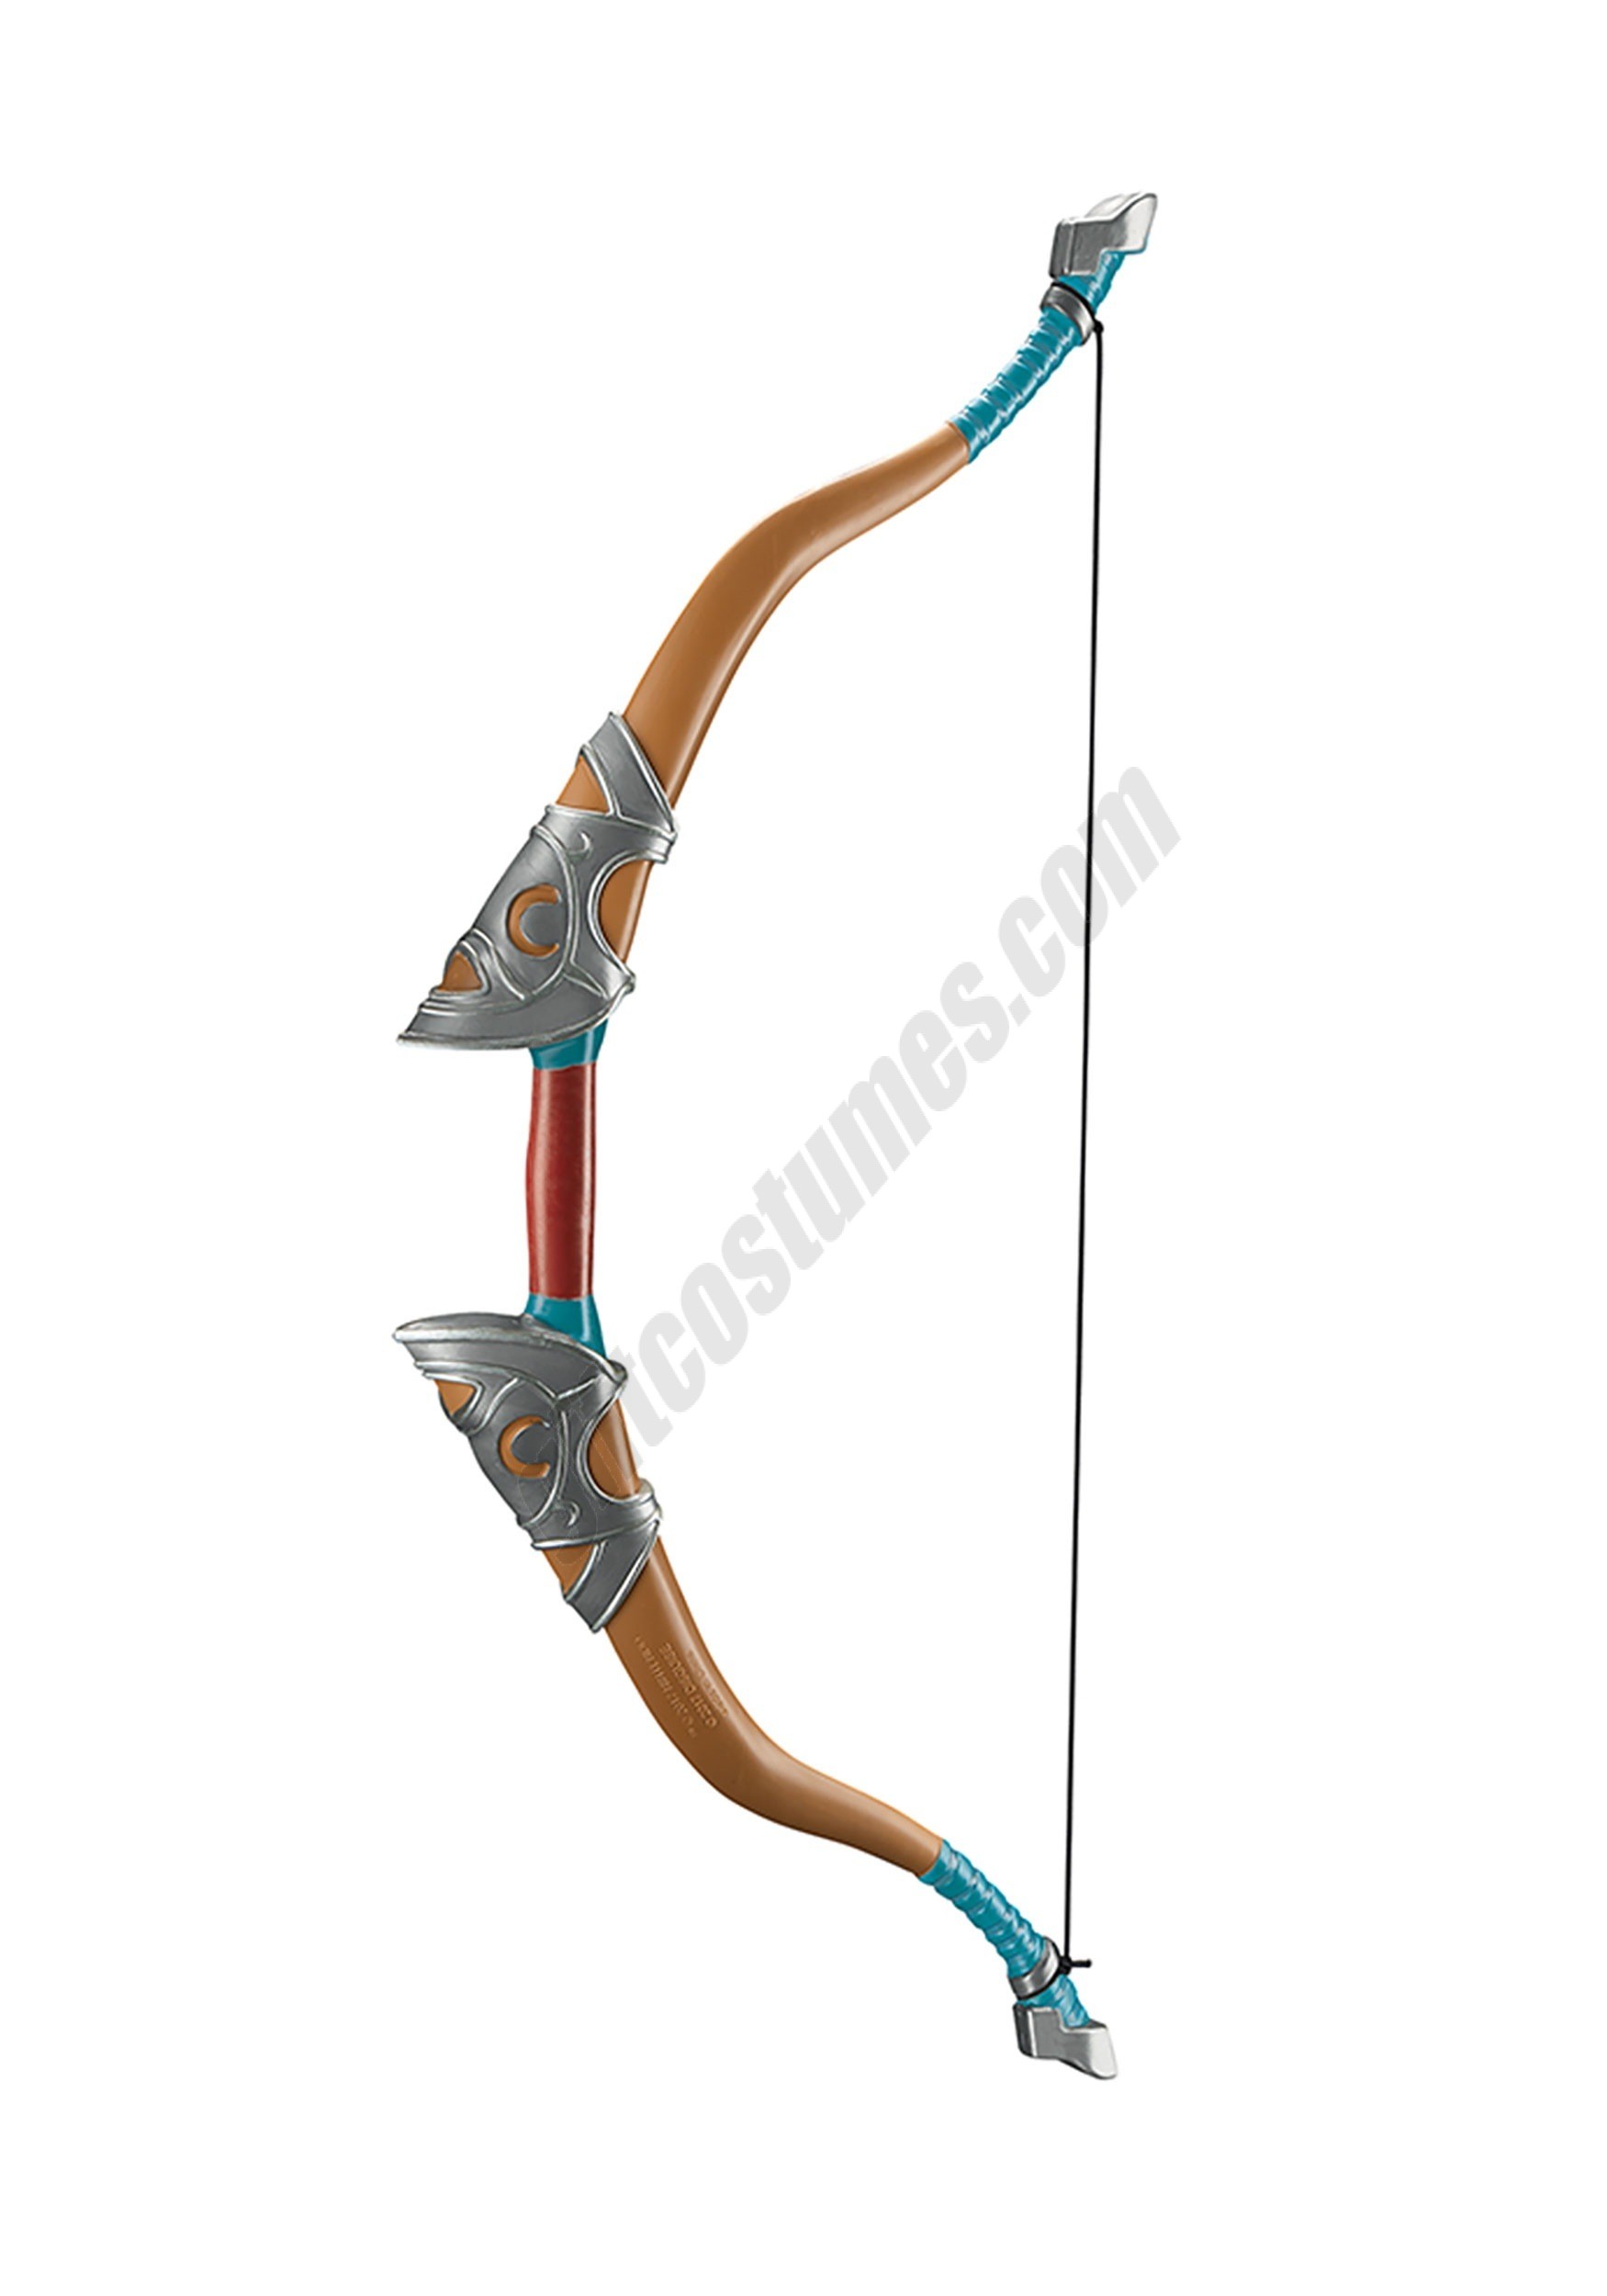 Link Breath of the Wild Bow & Arrow Promotions - Link Breath of the Wild Bow & Arrow Promotions